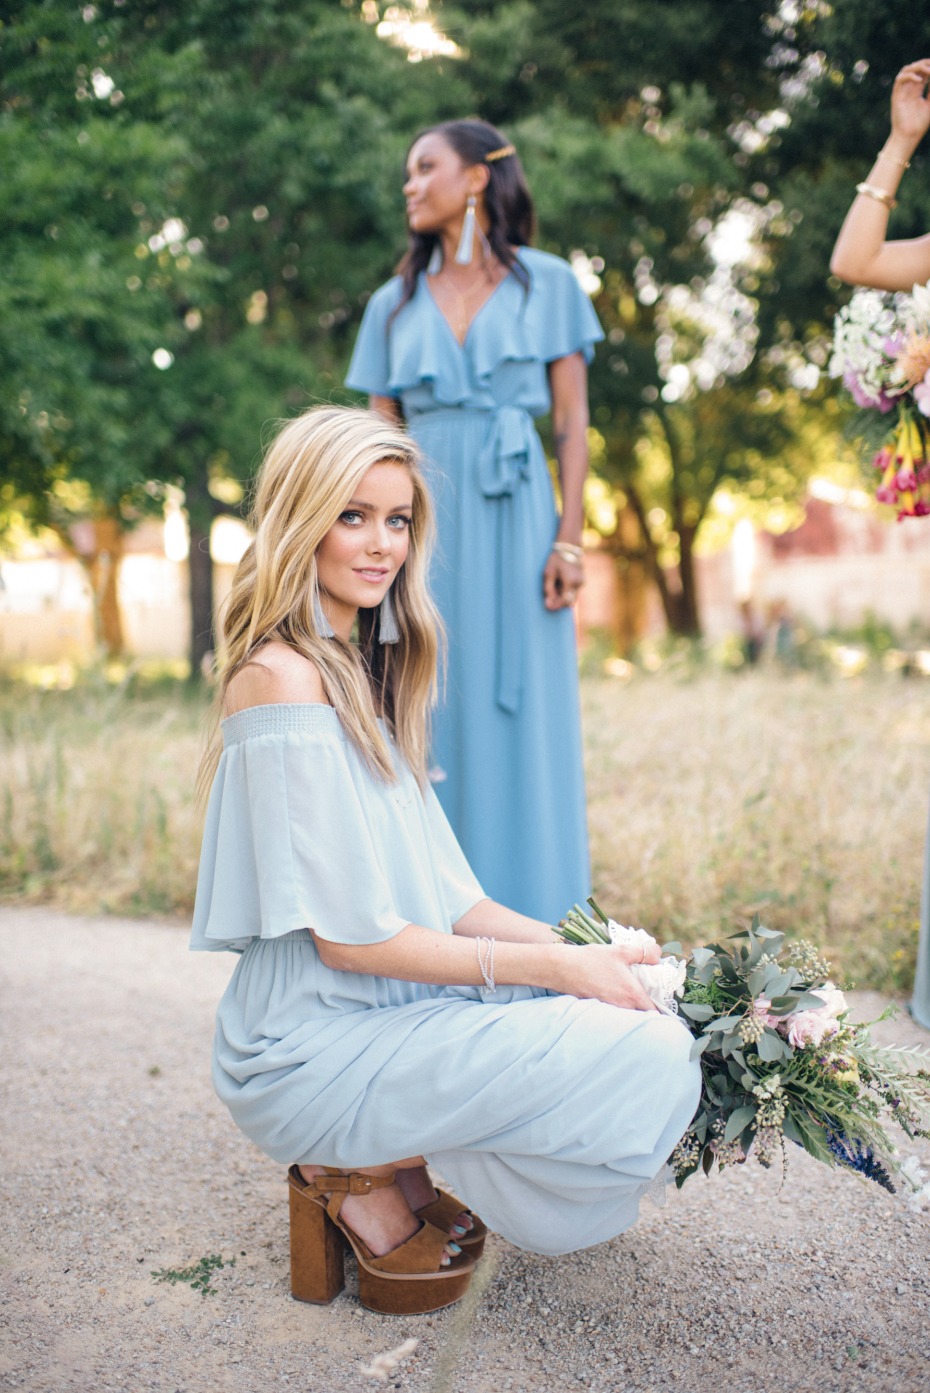 bridesmaid in chunky platforms and blue bridesmaid dress from Show Me Your Mumu